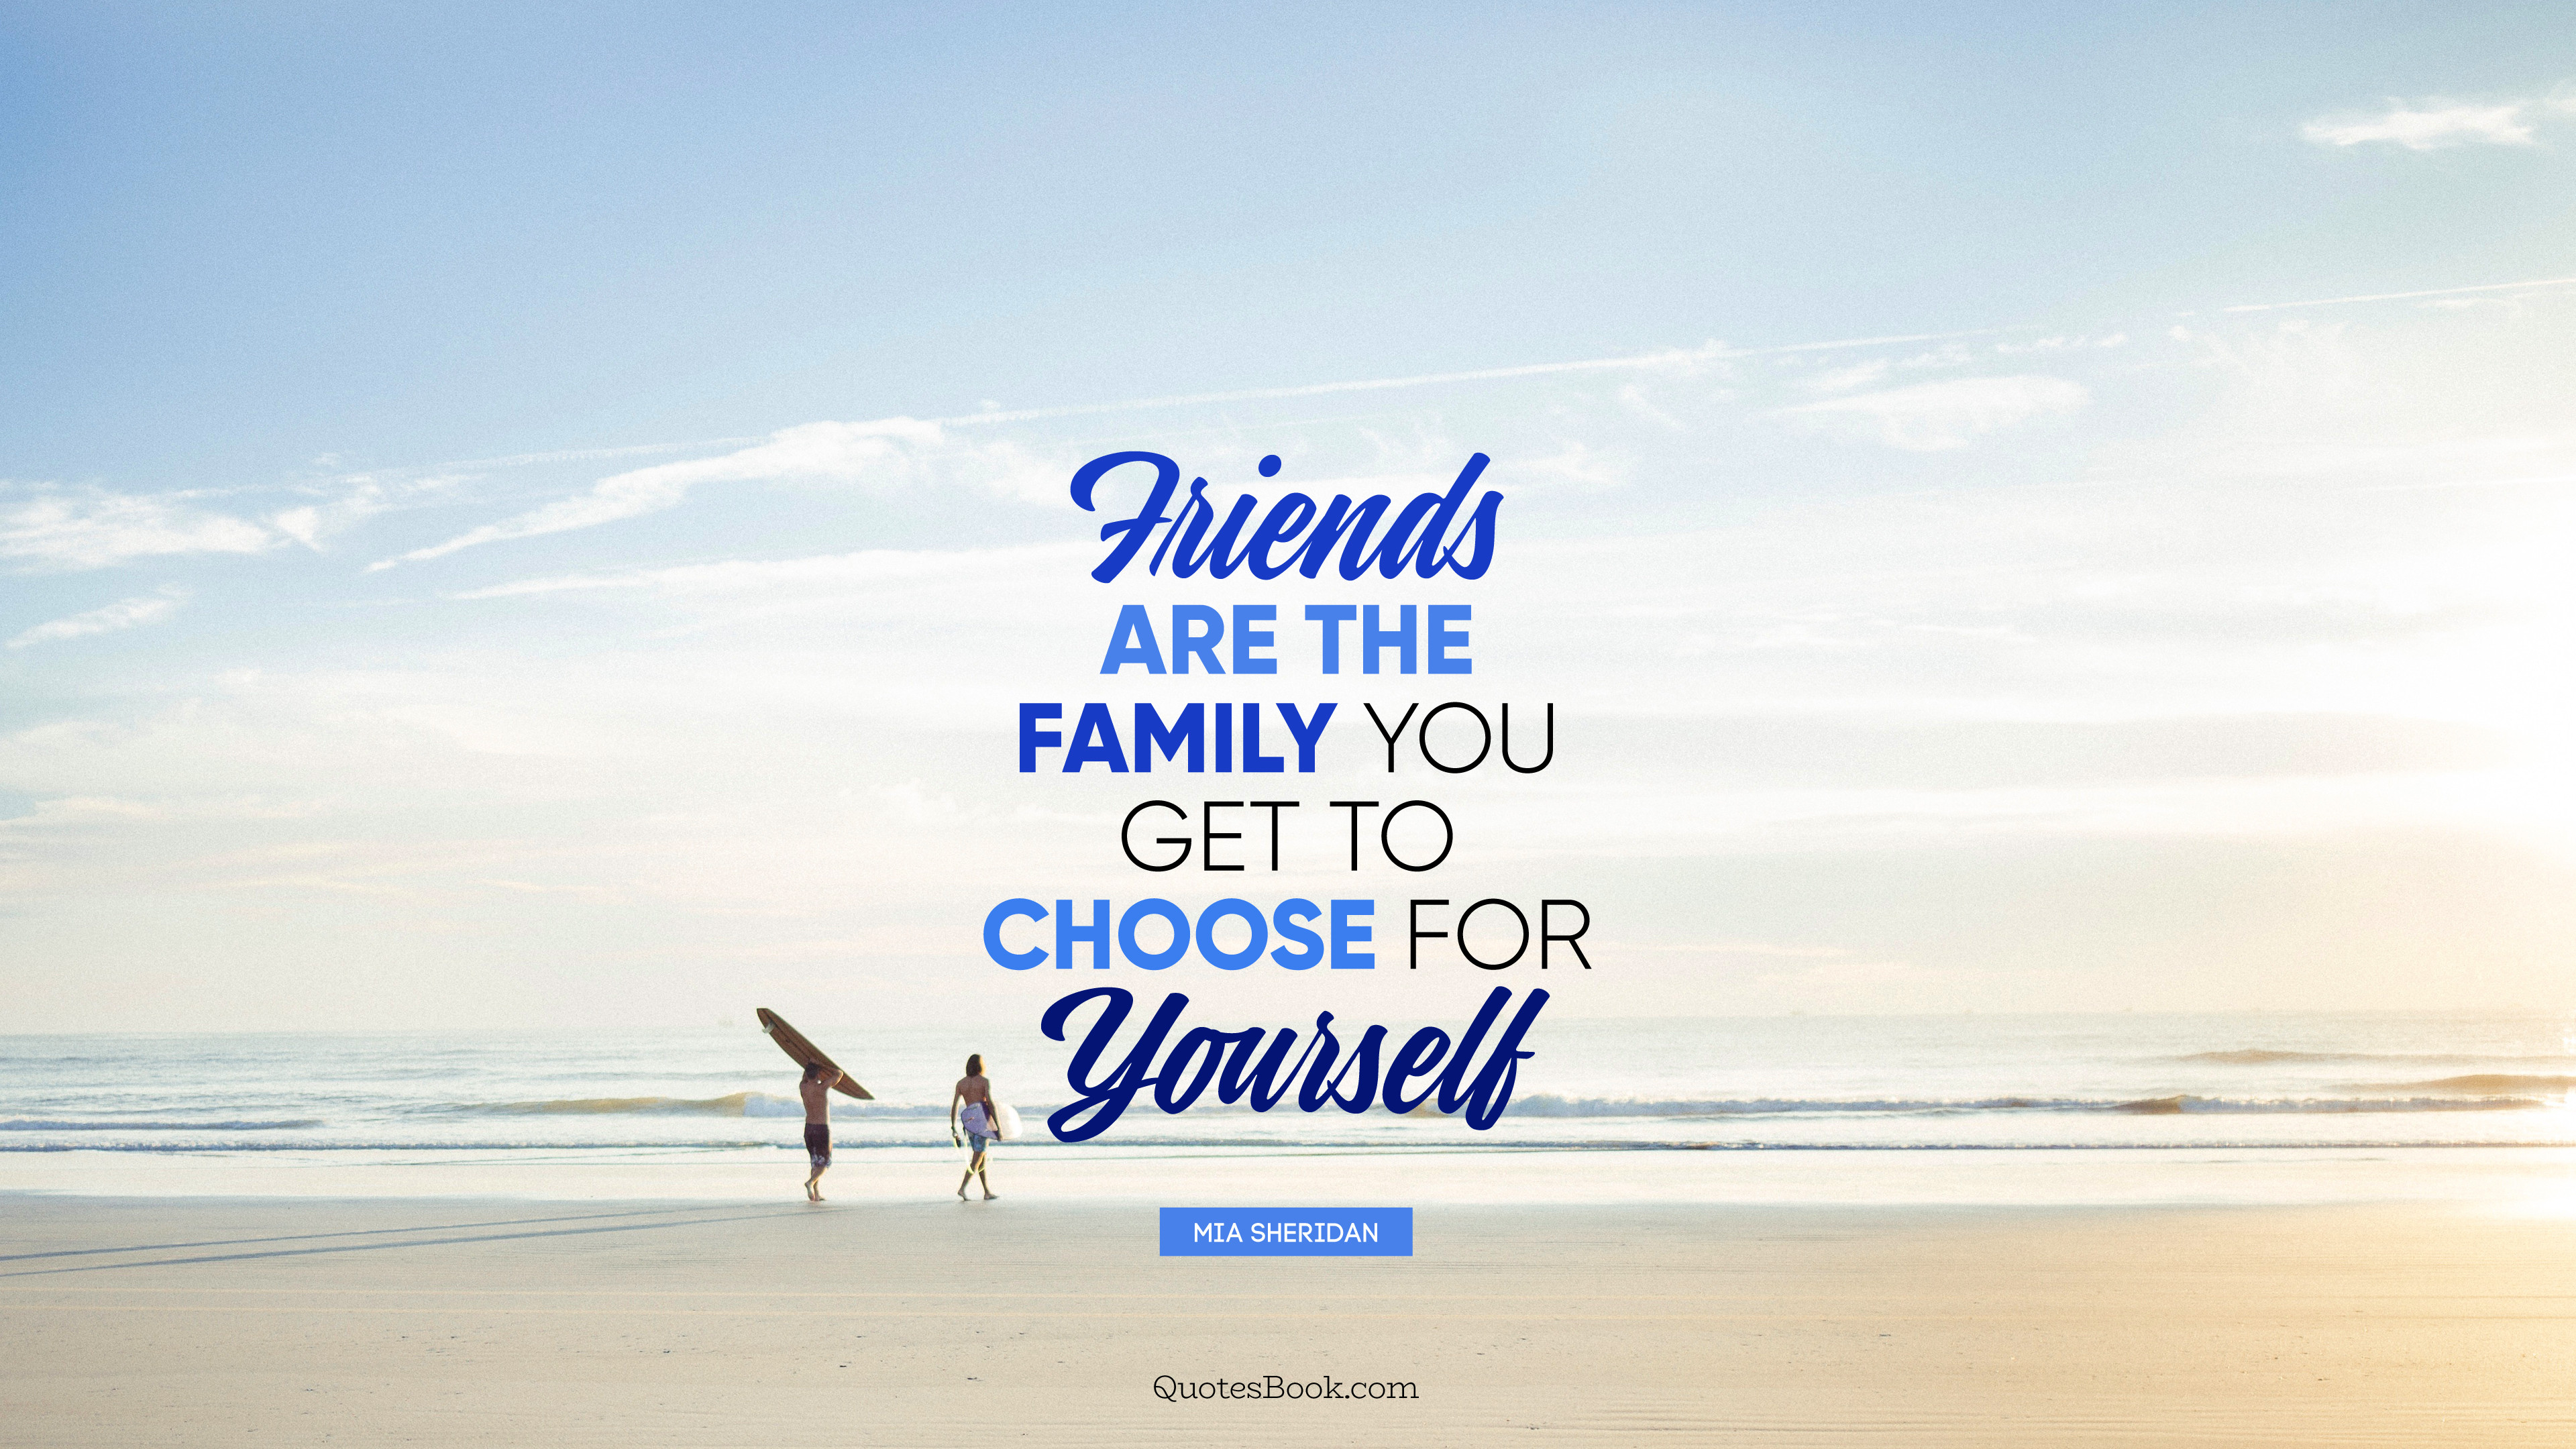 Friends are the family you get to choose for yourself. - Quote by Mia